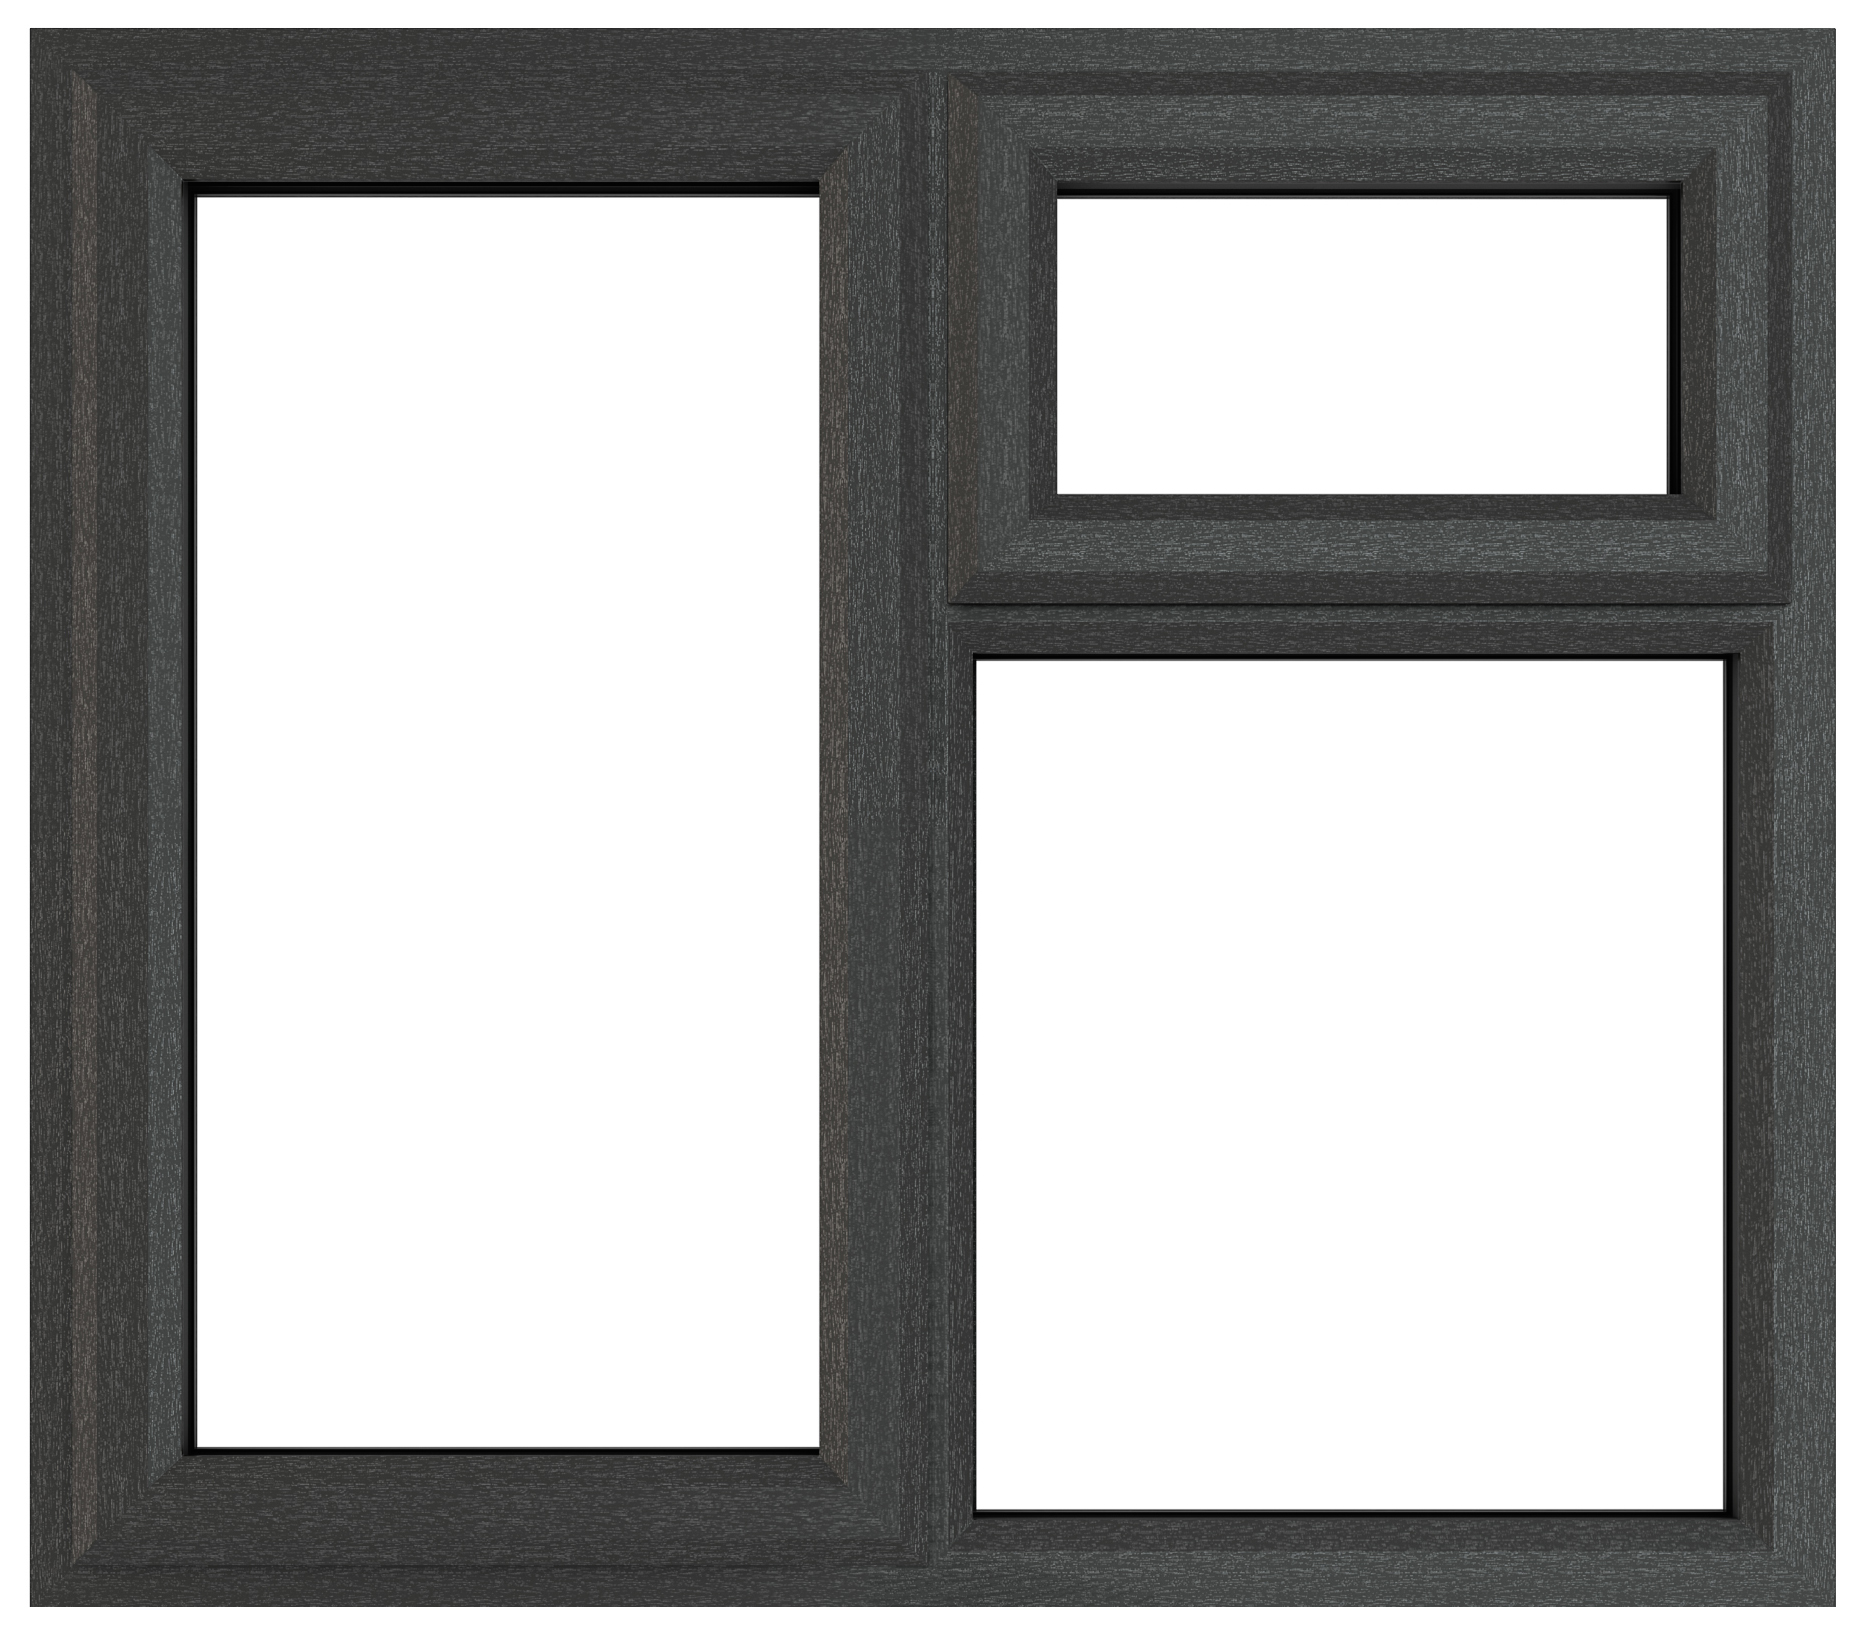 Crystal uPVC Grey Left Hung Top Opener Clear Double Glazed Fixed Light Window - 1190 x 1115mm